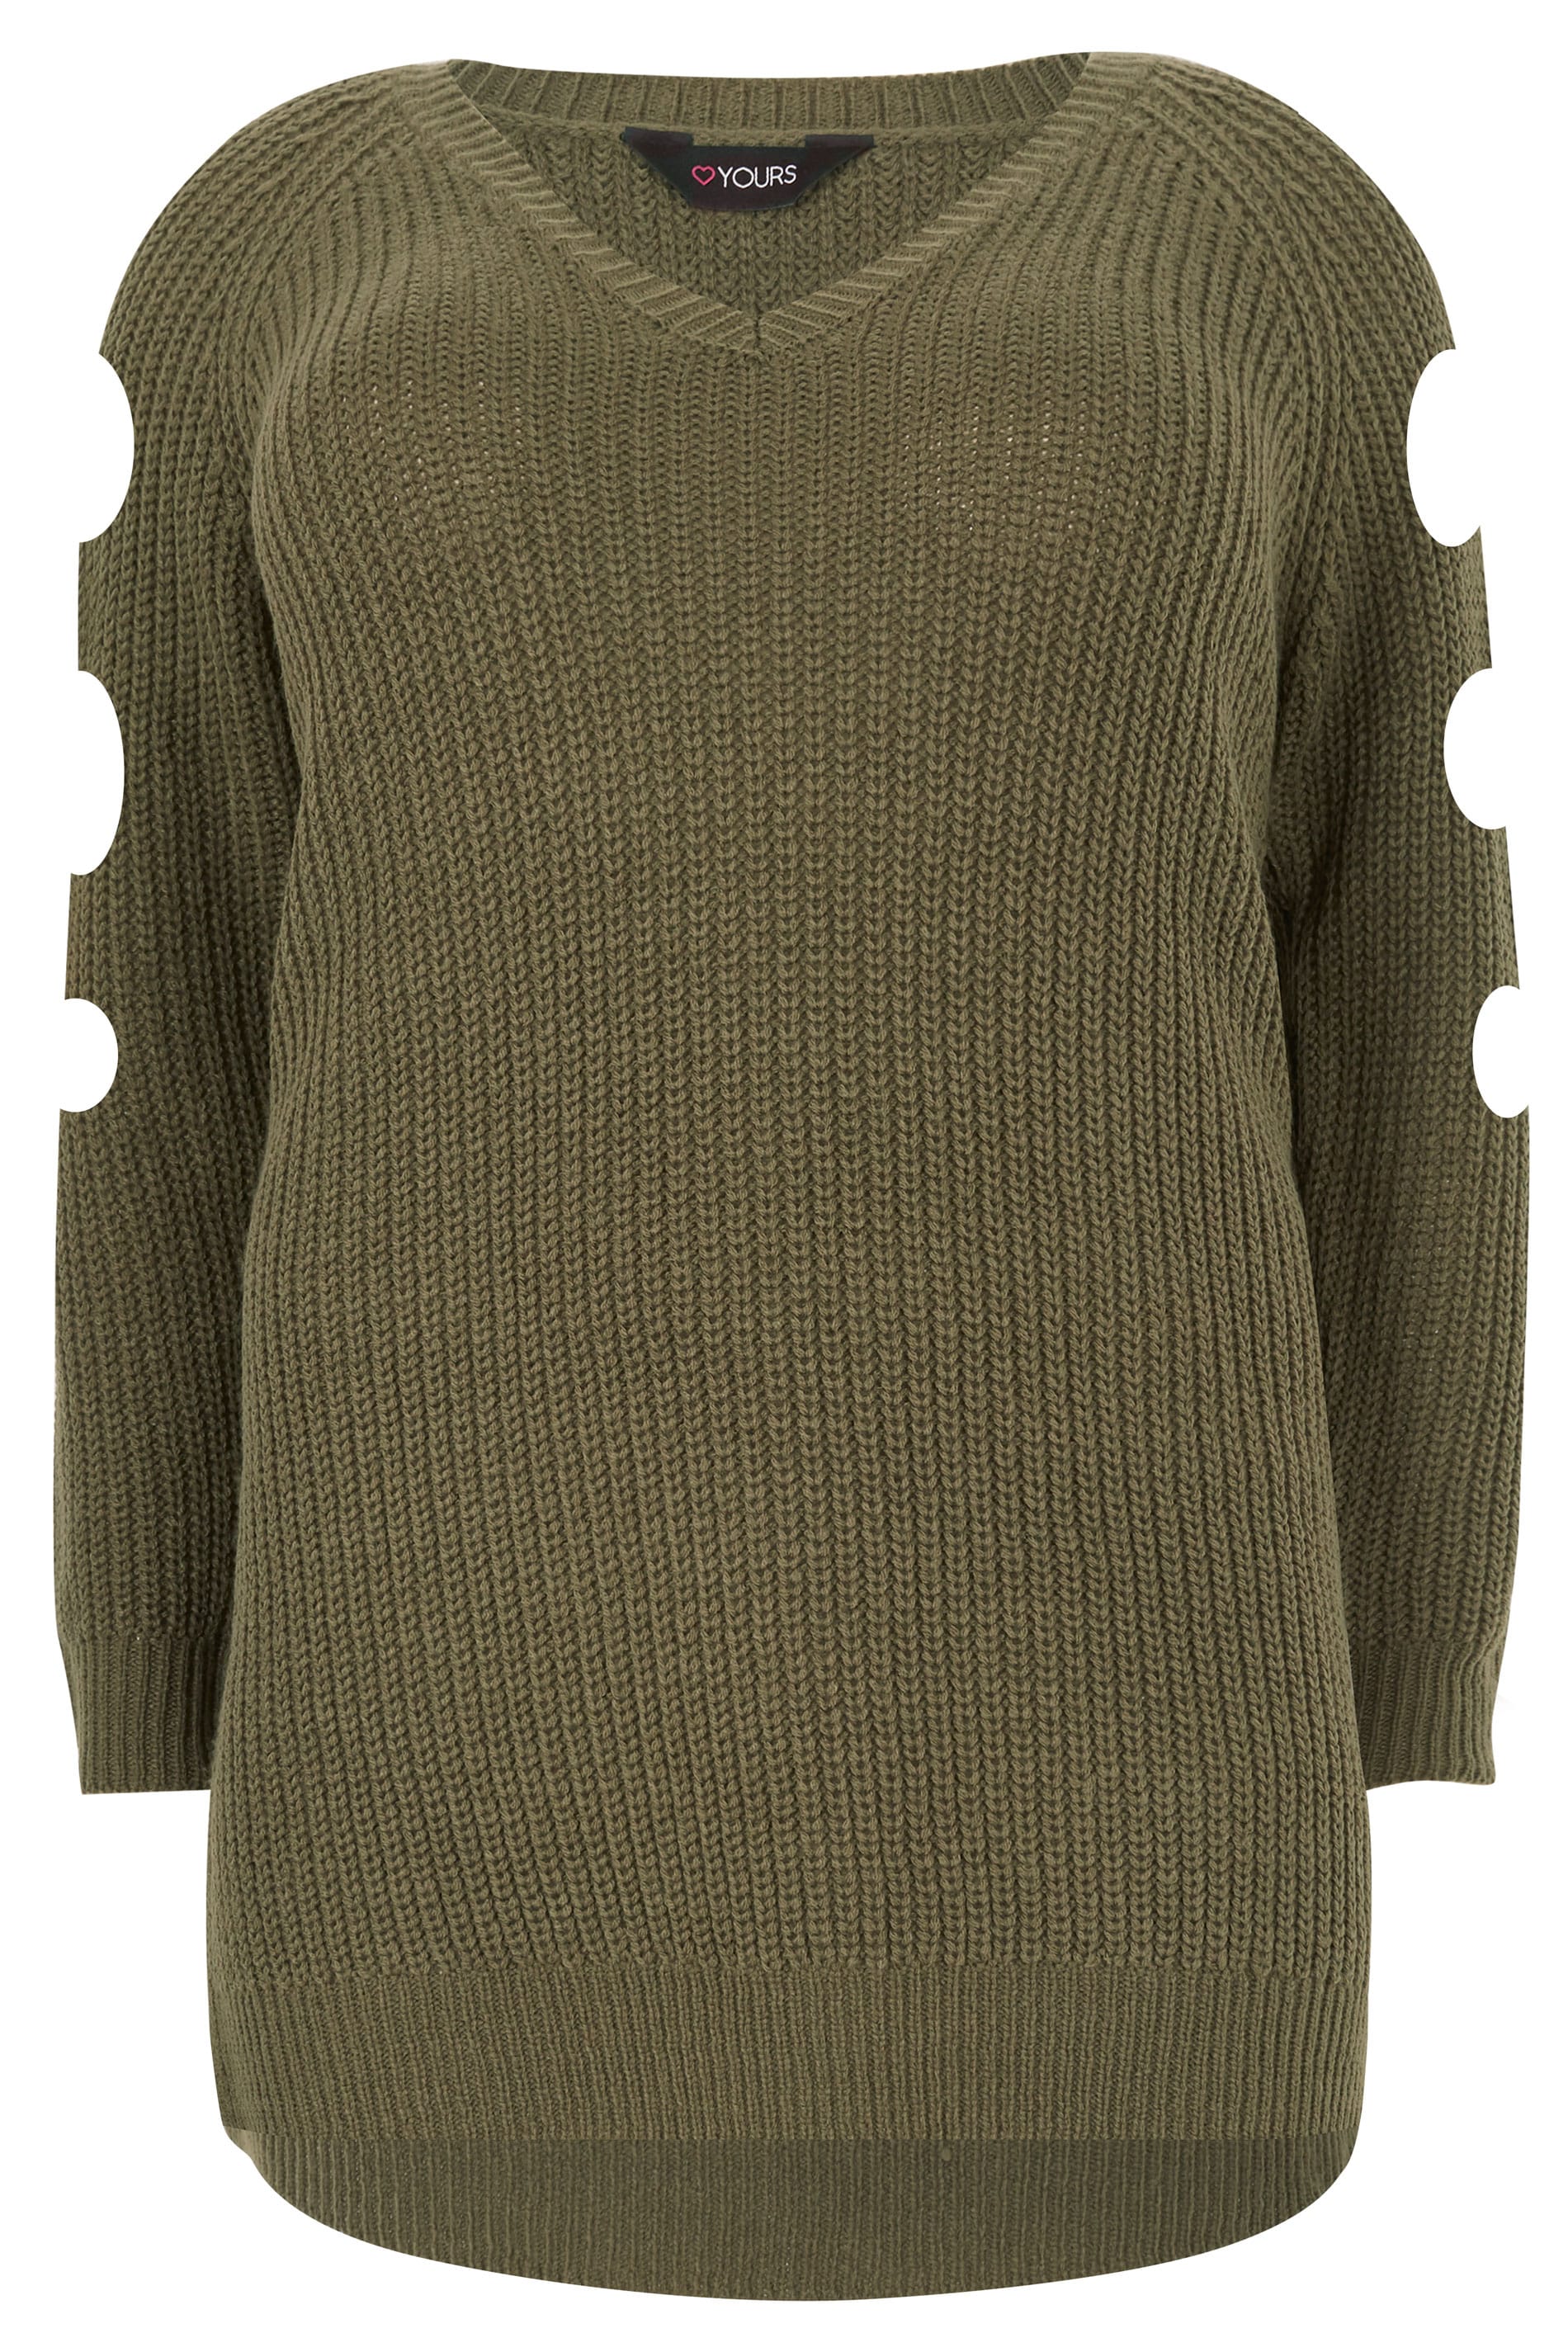 Khaki Chunky Knit Longline Jumper With Cut Out Sleeves, plus size 16 to 36